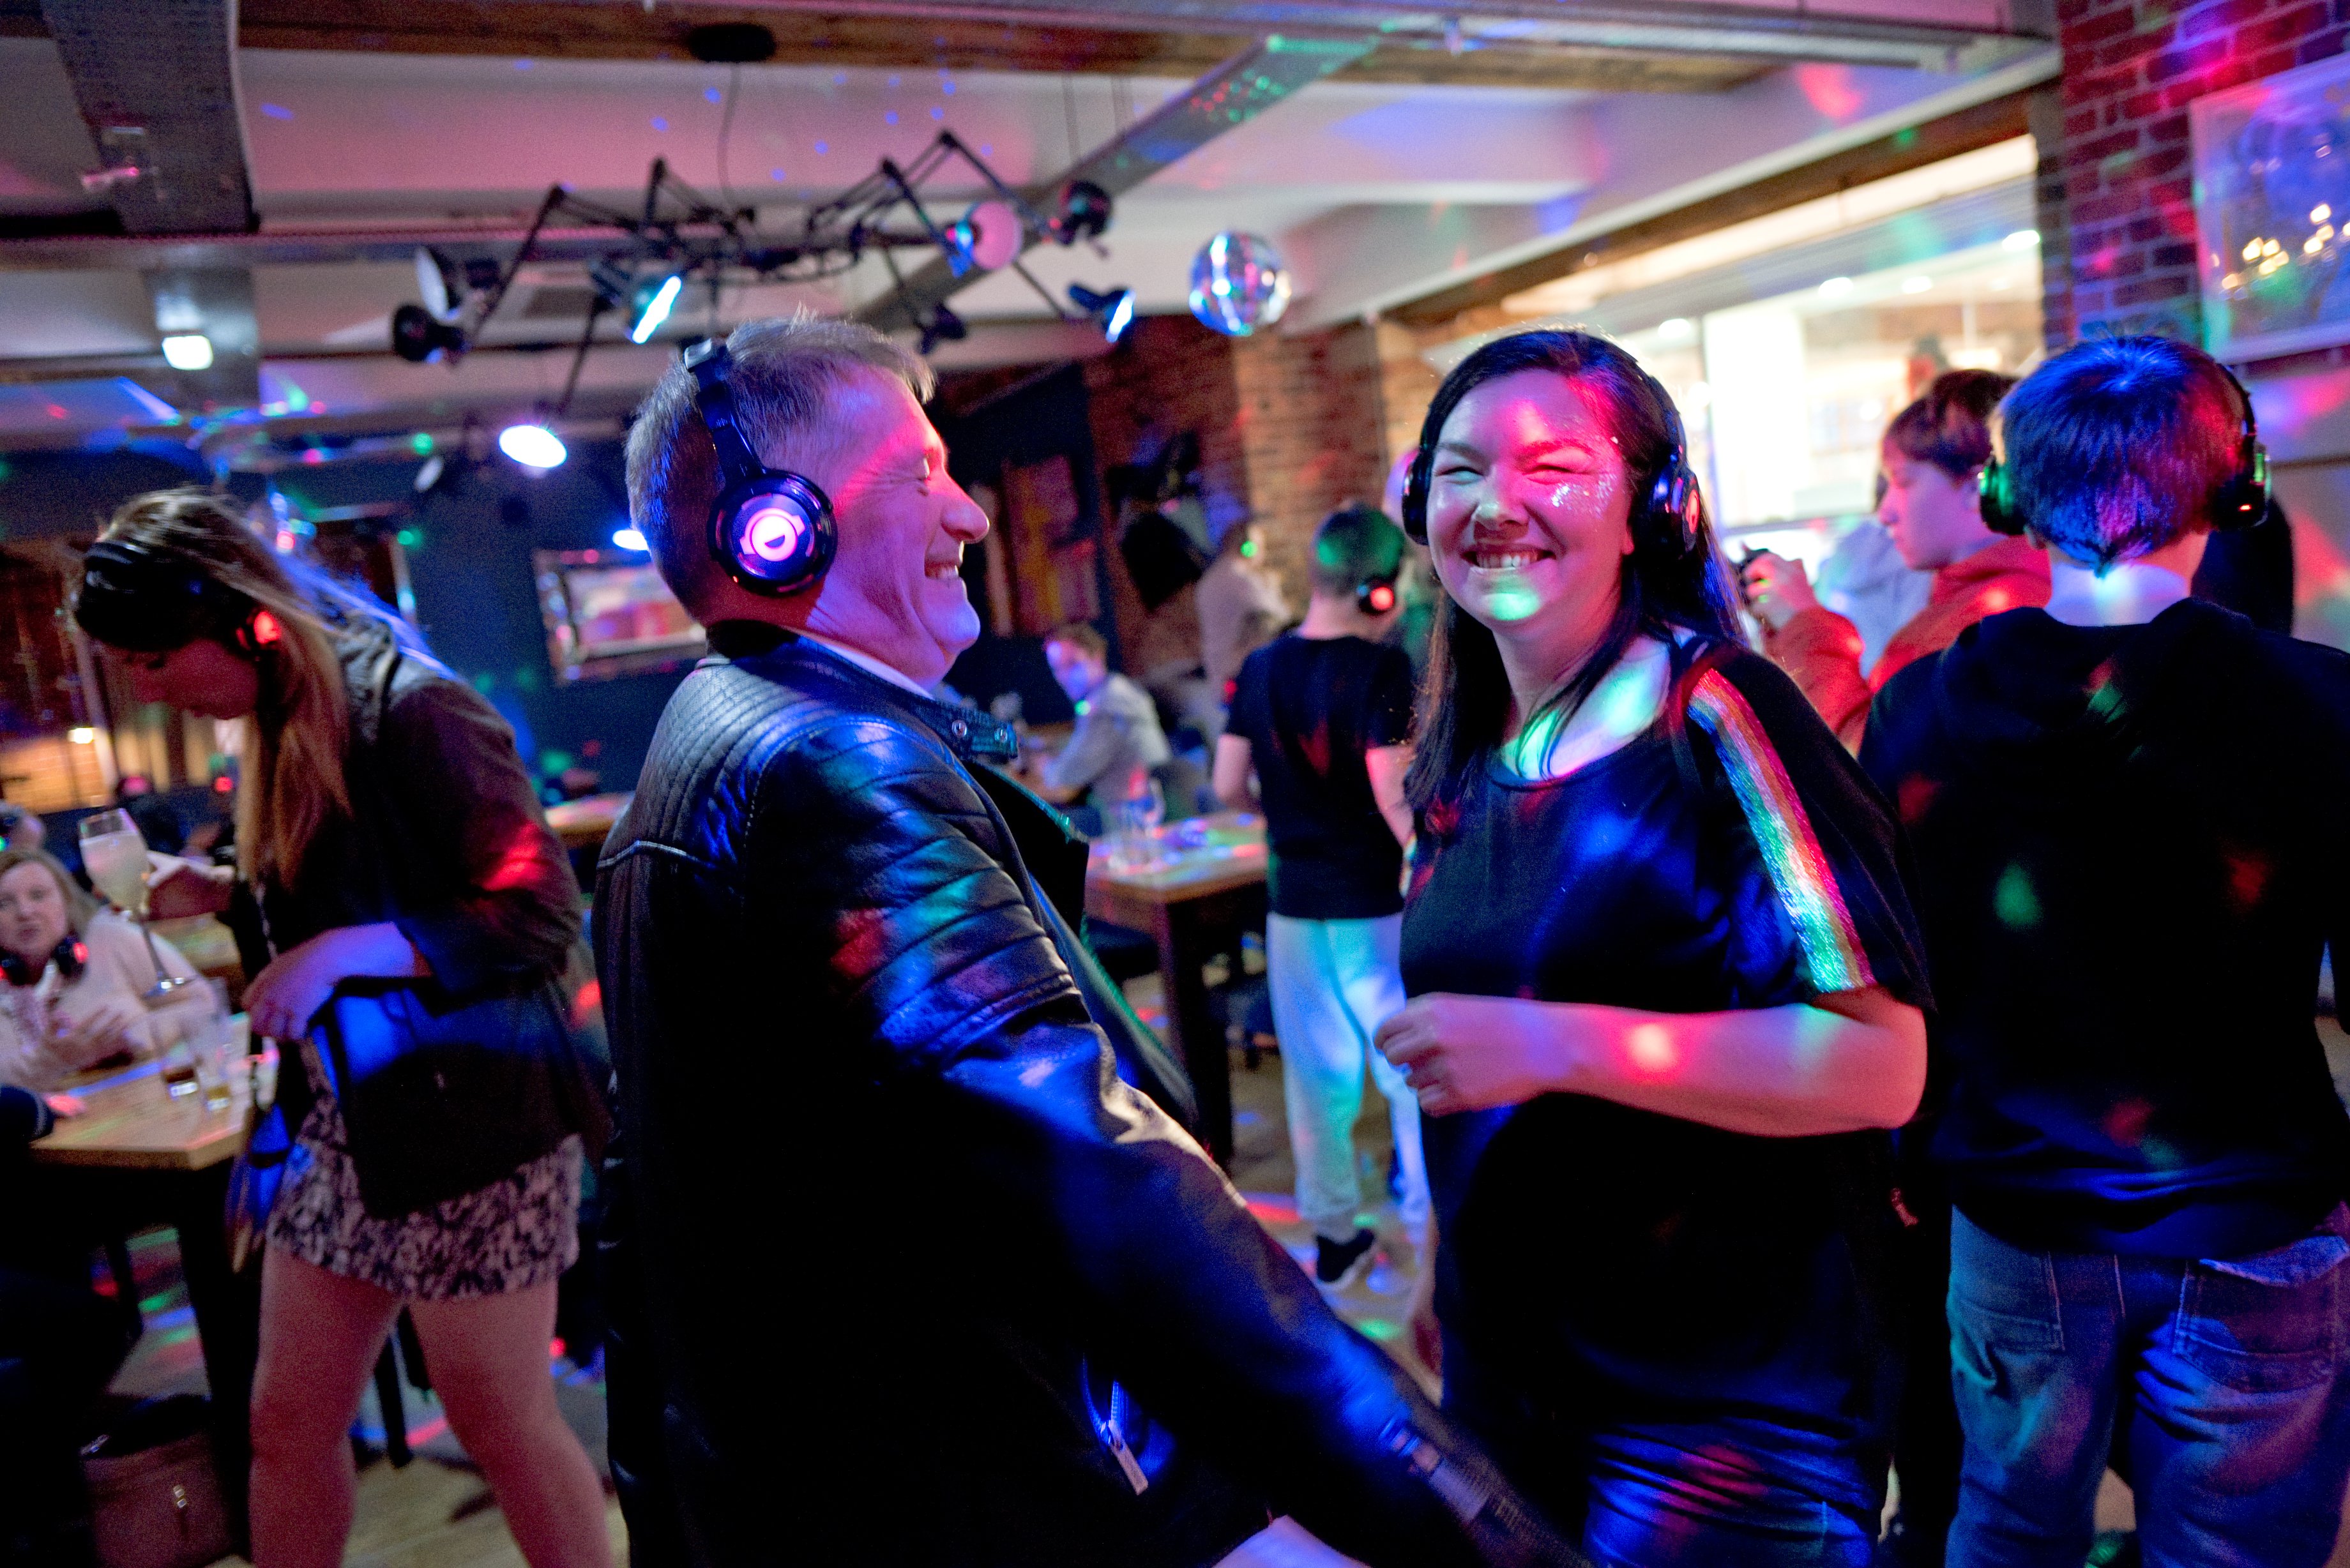 Late Shows - two people are dancing at a silent disco